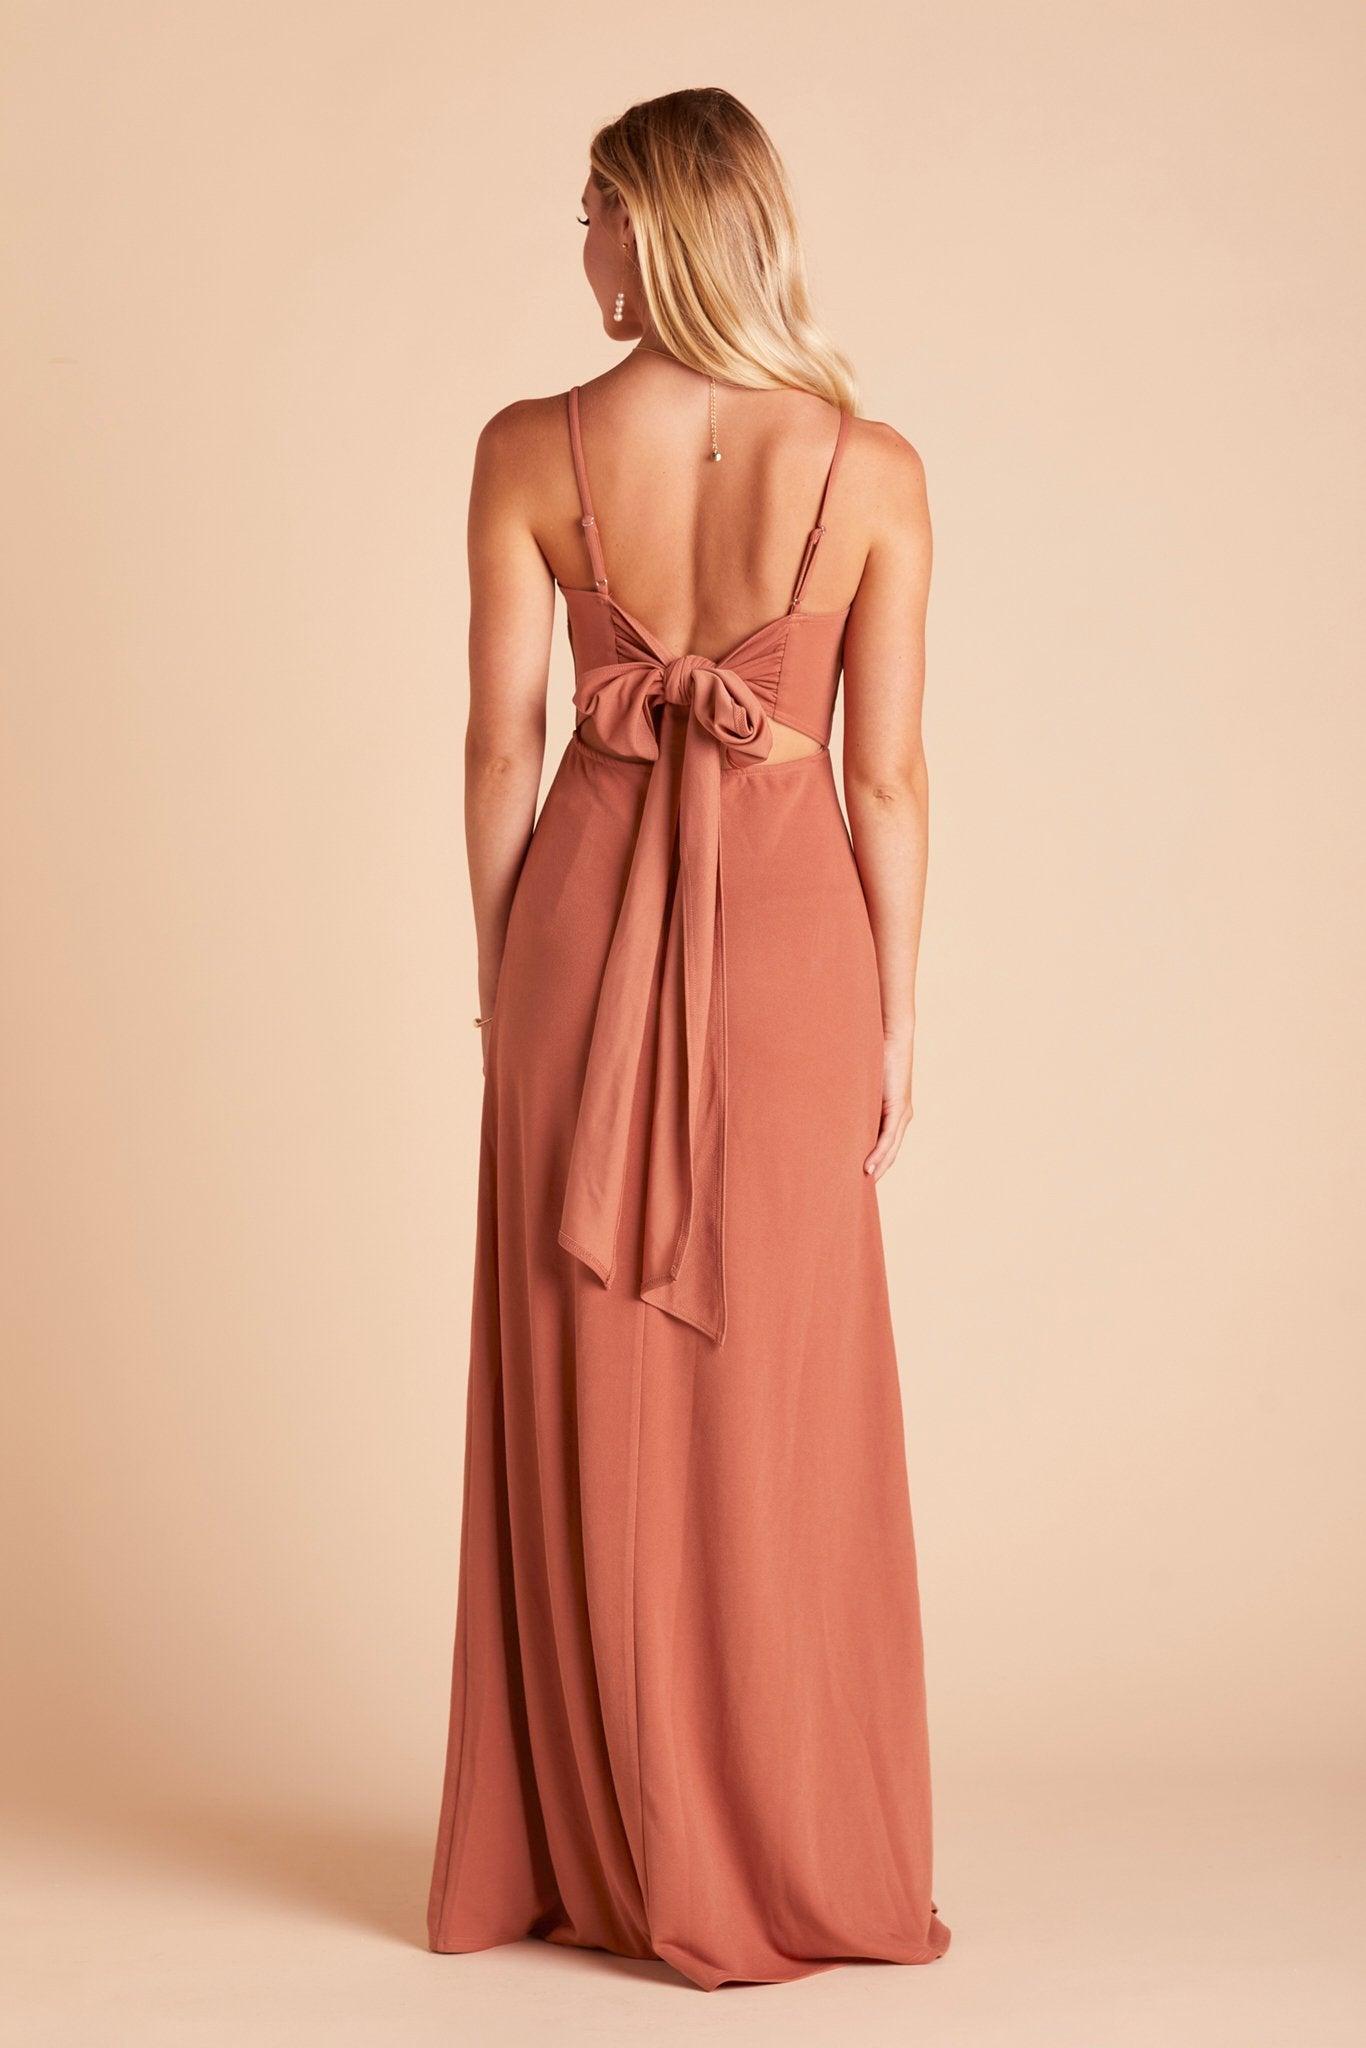 Benny bridesmaid dress in terracotta crepe by Birdy Grey, back view